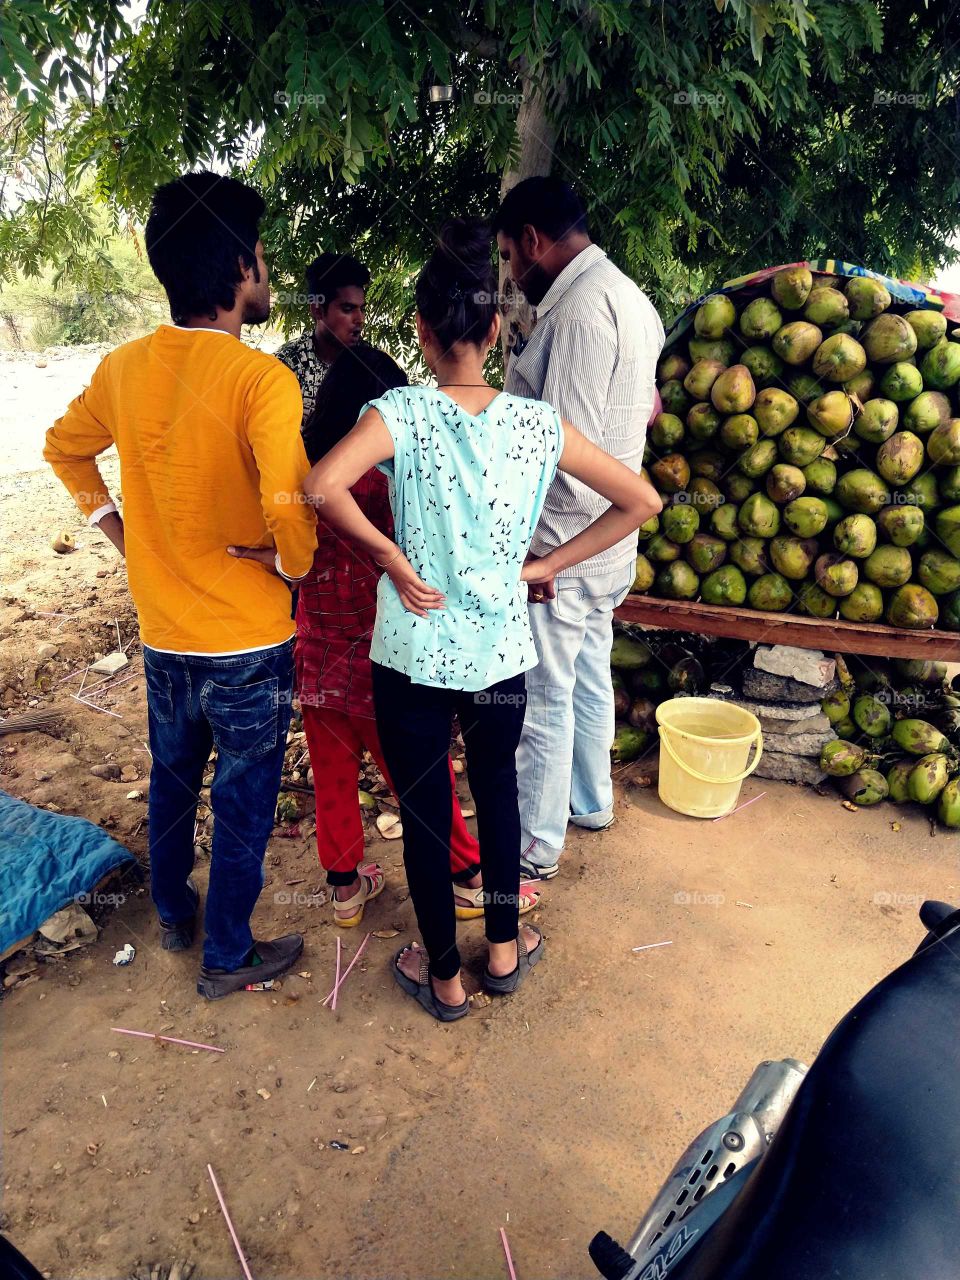 These people stood up to drink coconut water